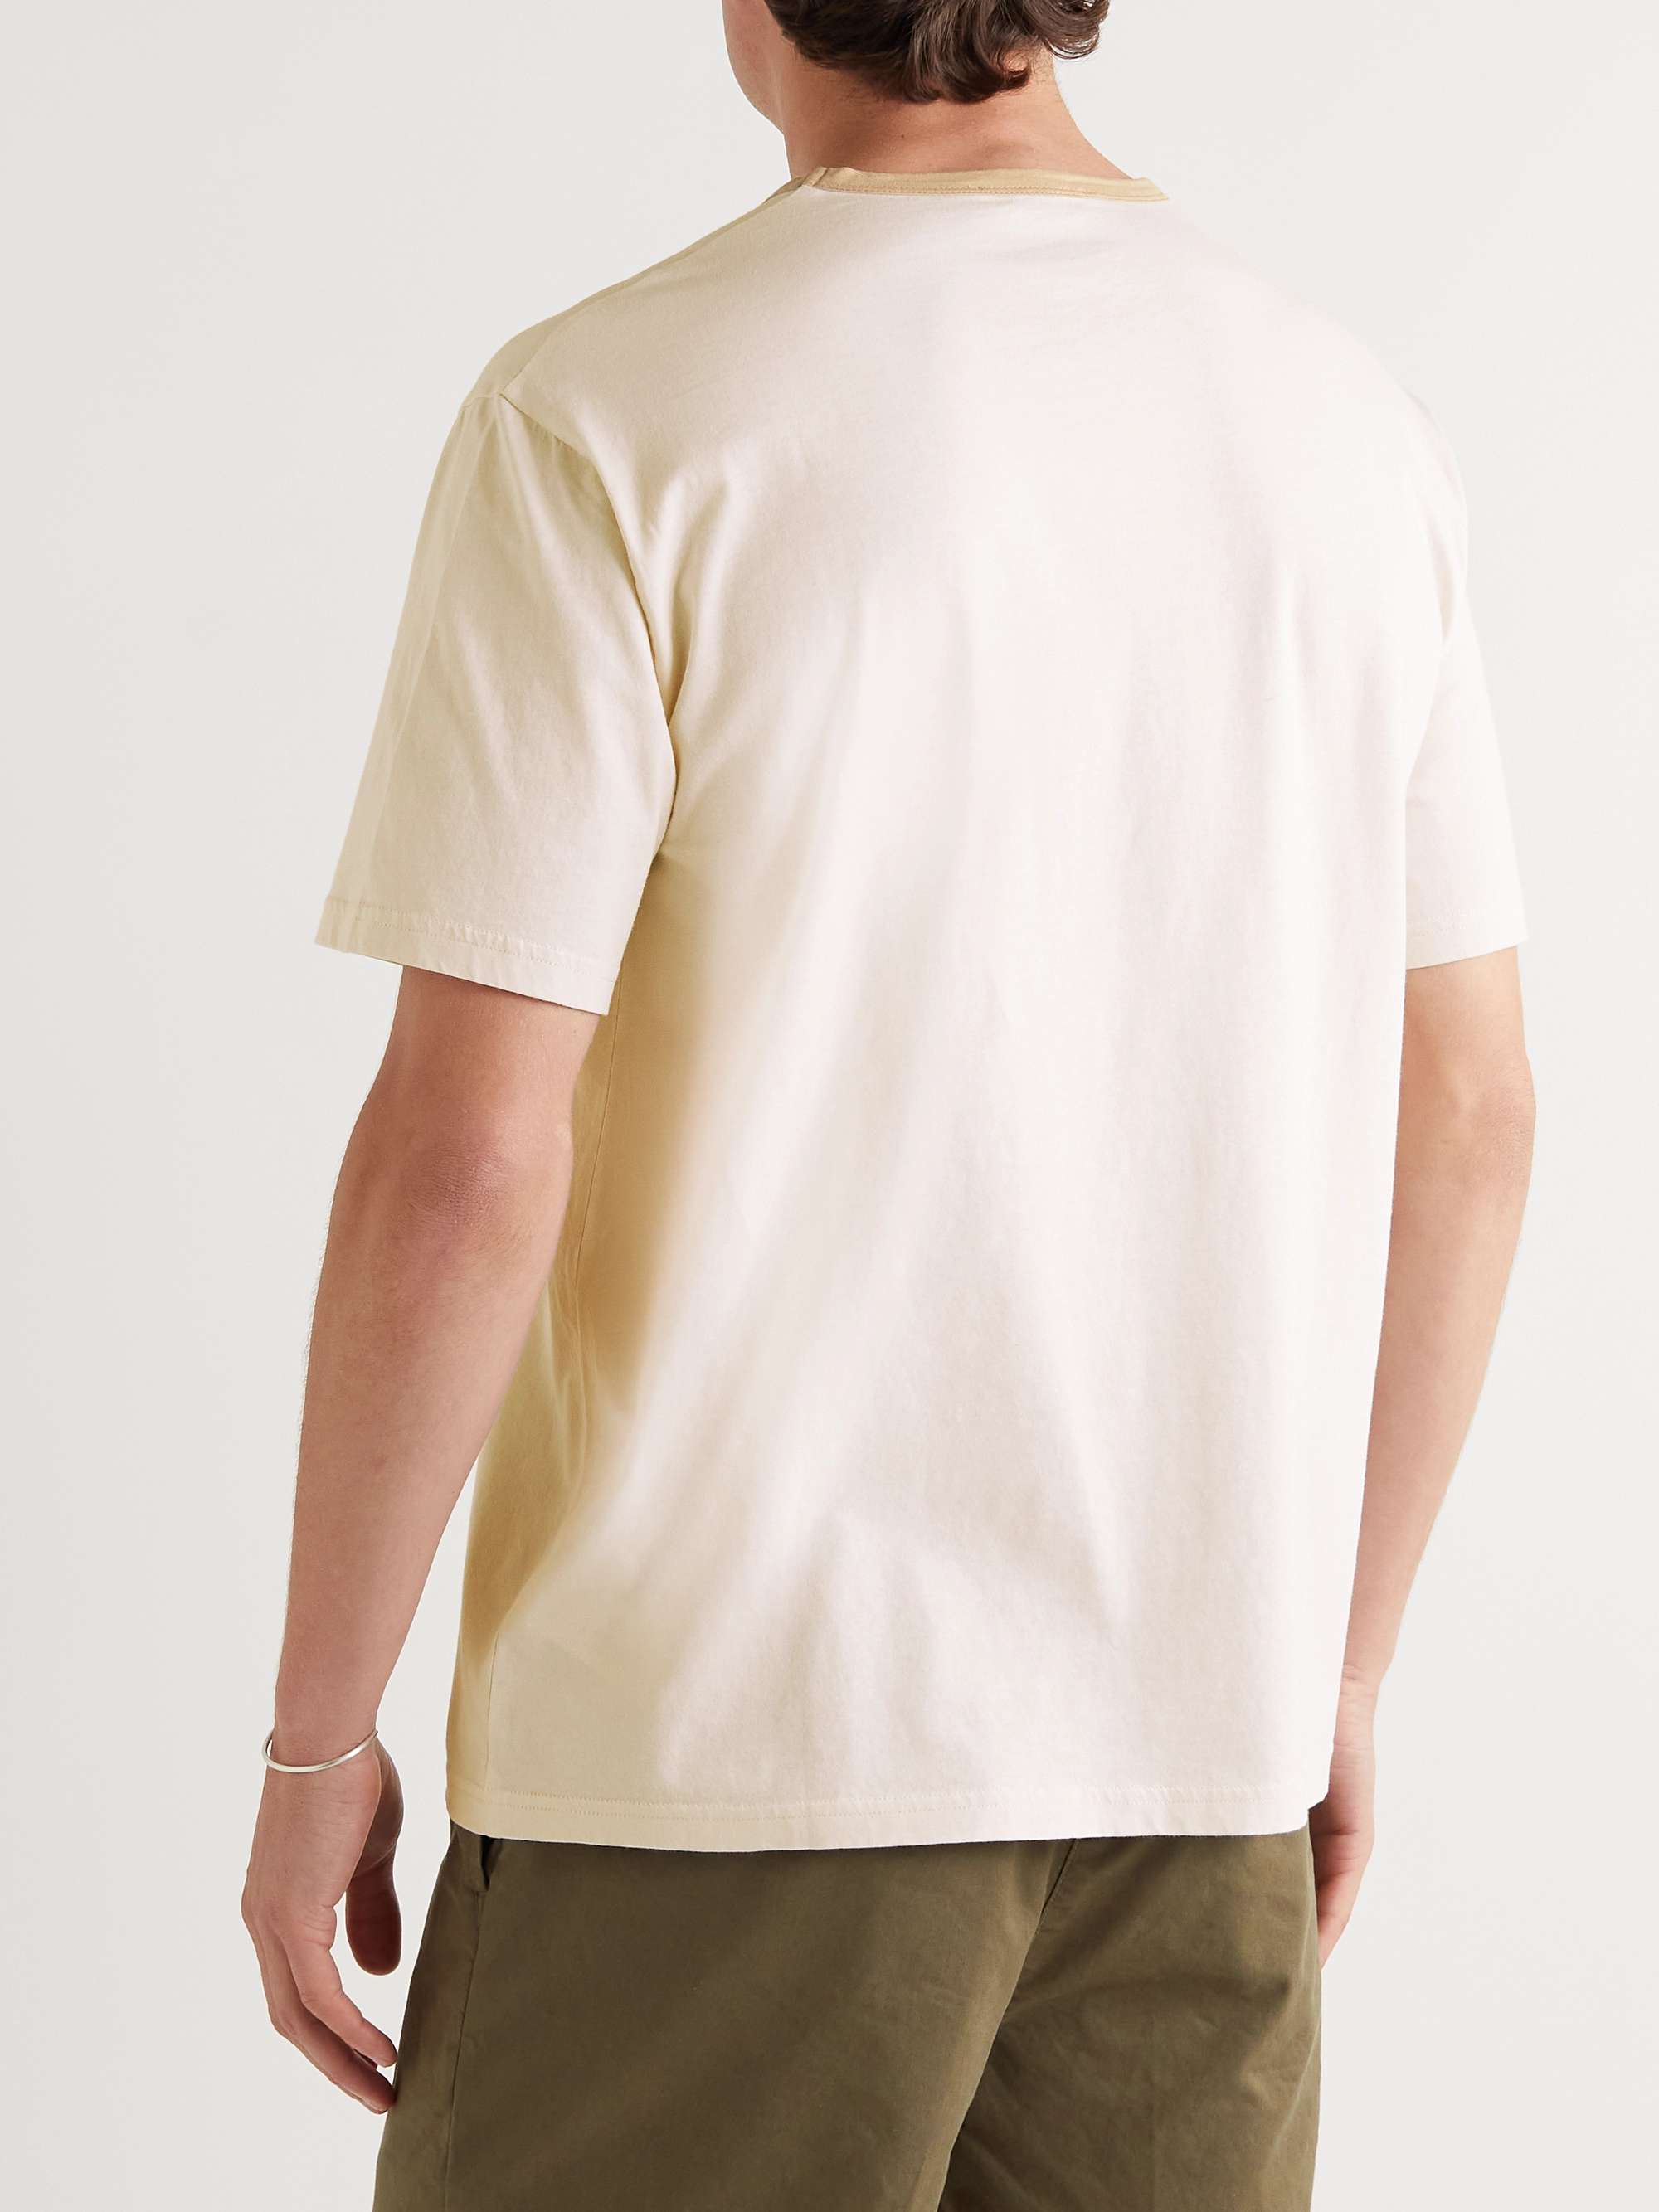 MR P. Embroidered Cotton-Jersey T-Shirt